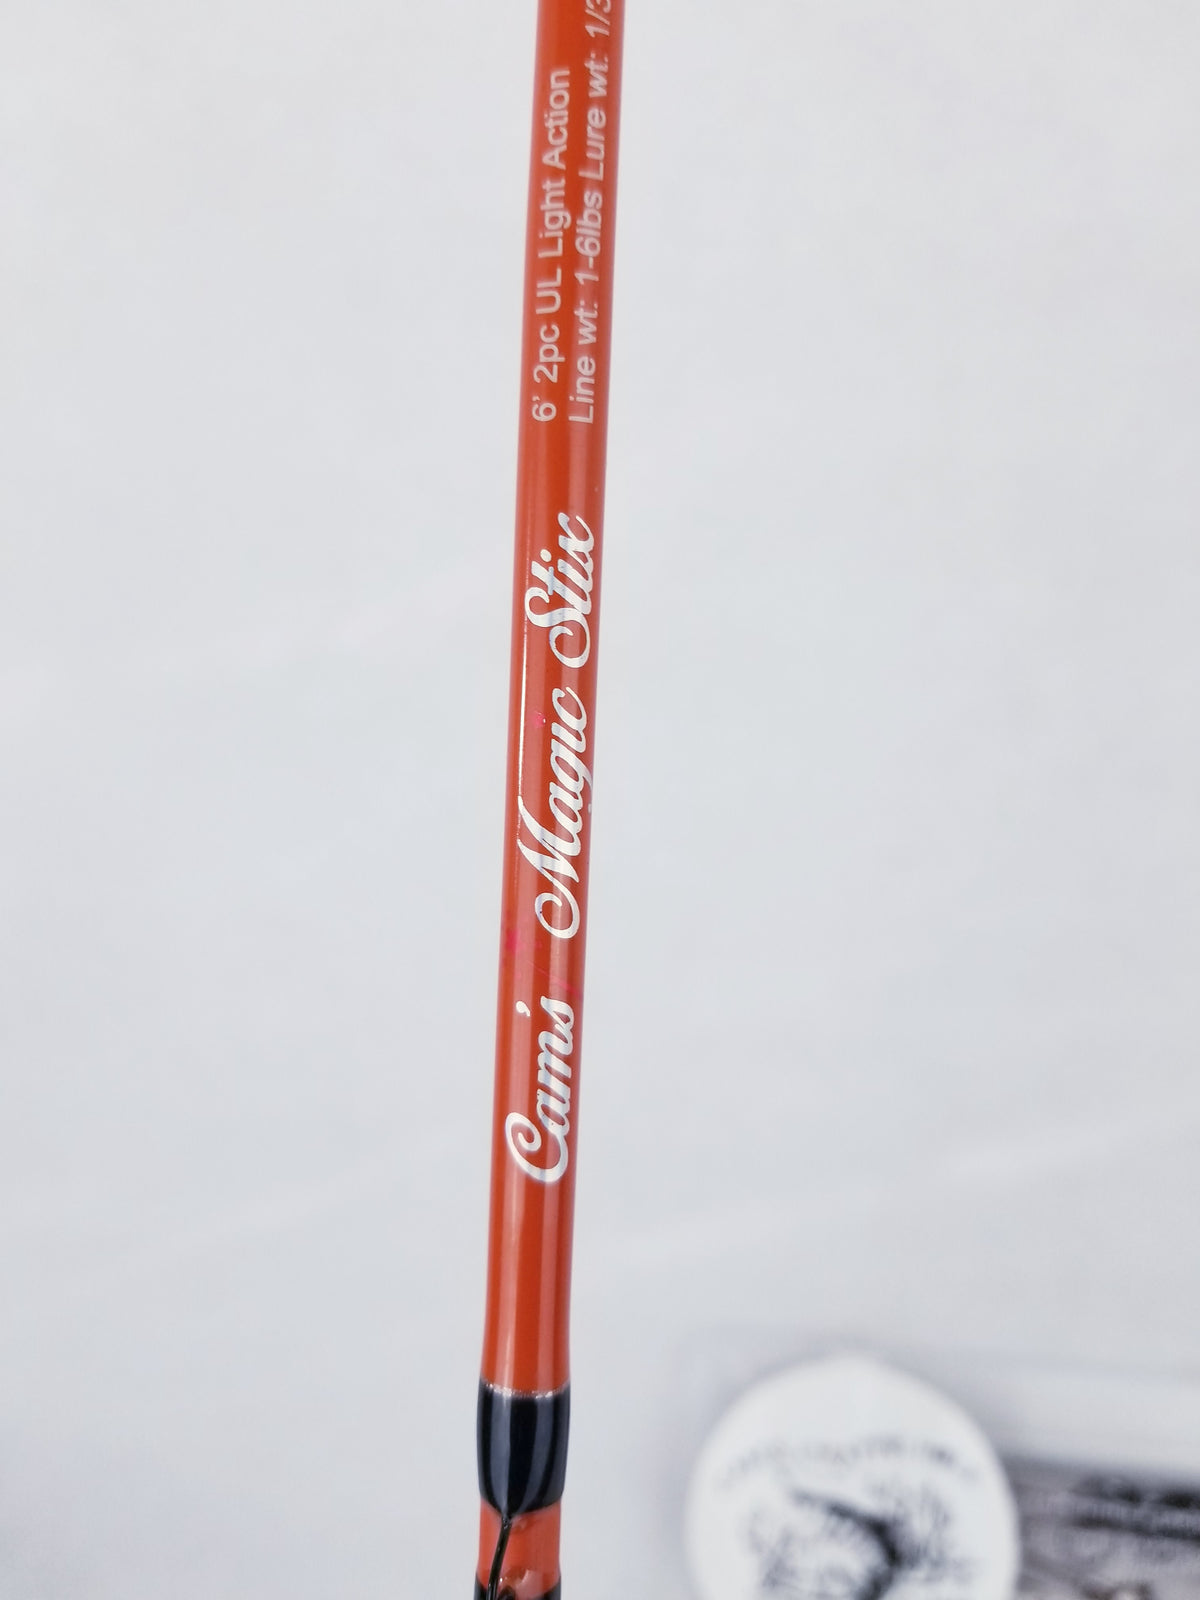 Cam's "ORANGE POSEIDON"6'0 Complete Combo Blow Out Kit Special